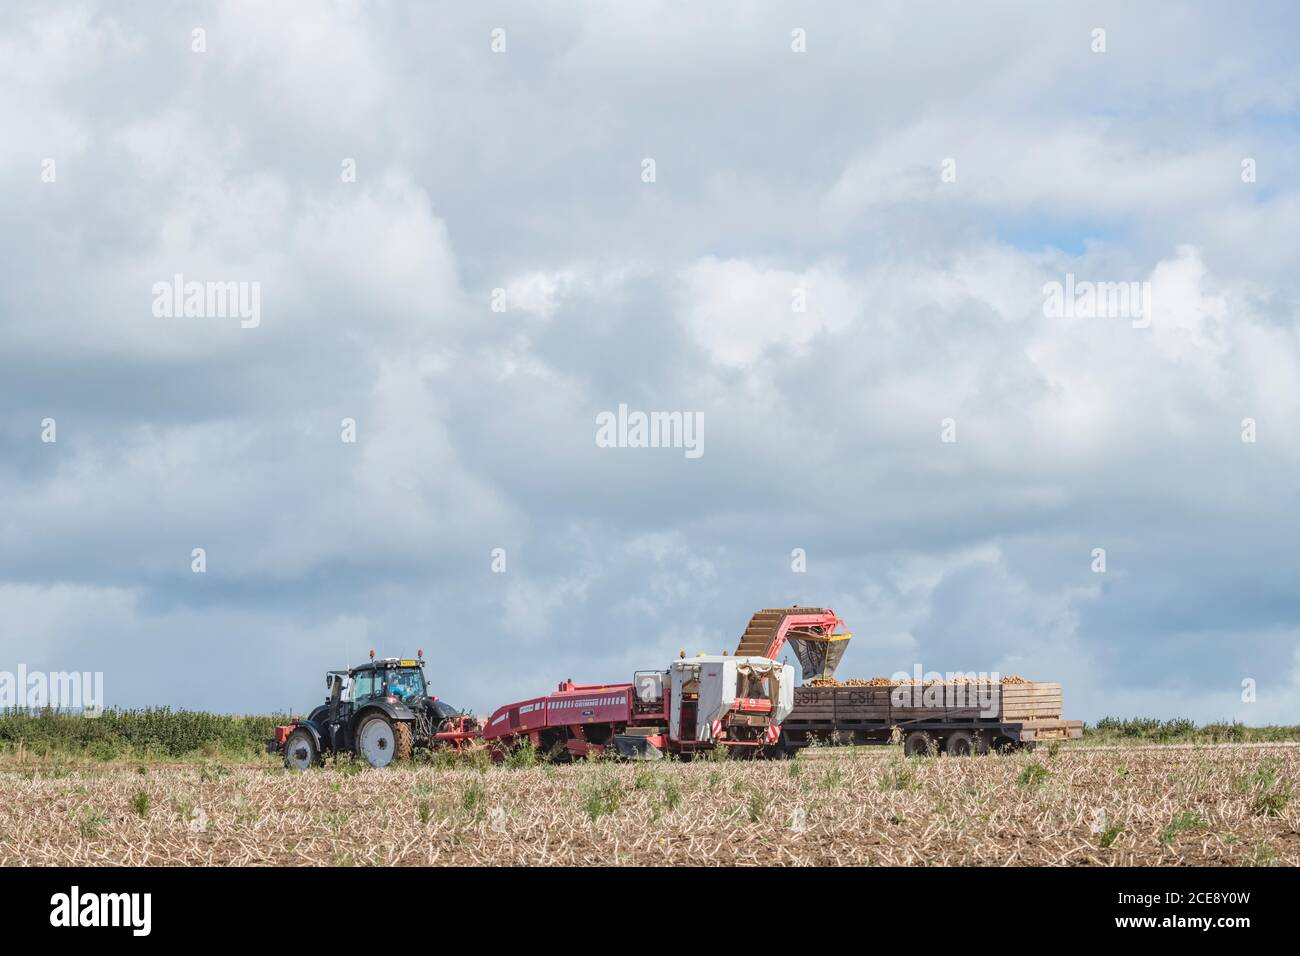 2020 UK potato harvesting with Grimme potato harvester pulled by Valtra tractor, set against cloudy blue skyline. UK food growers. Stock Photo